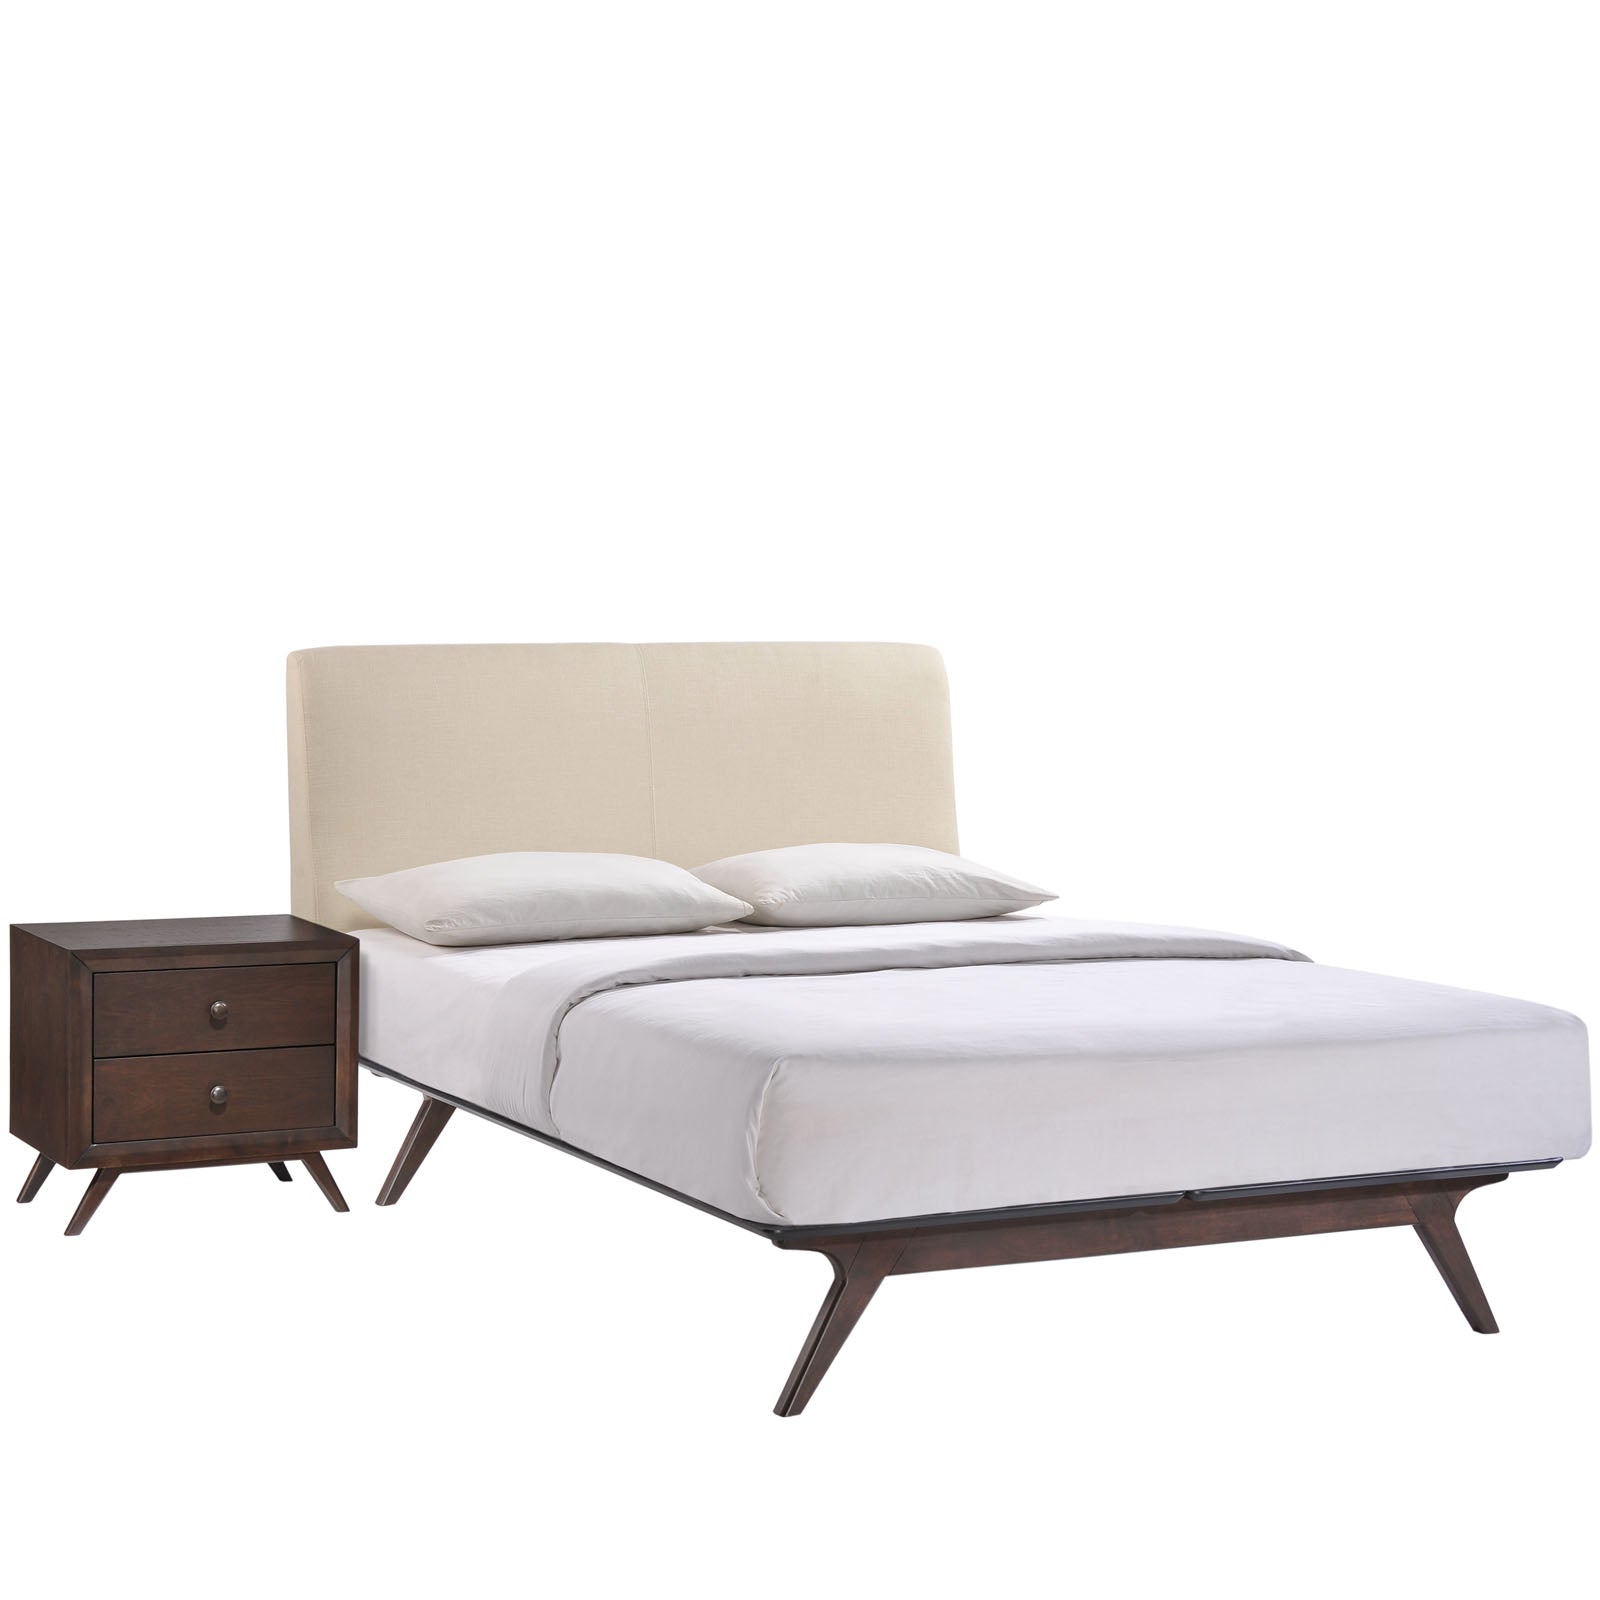 Tracy 2 Piece Queen Bedroom Set - East Shore Modern Home Furnishings